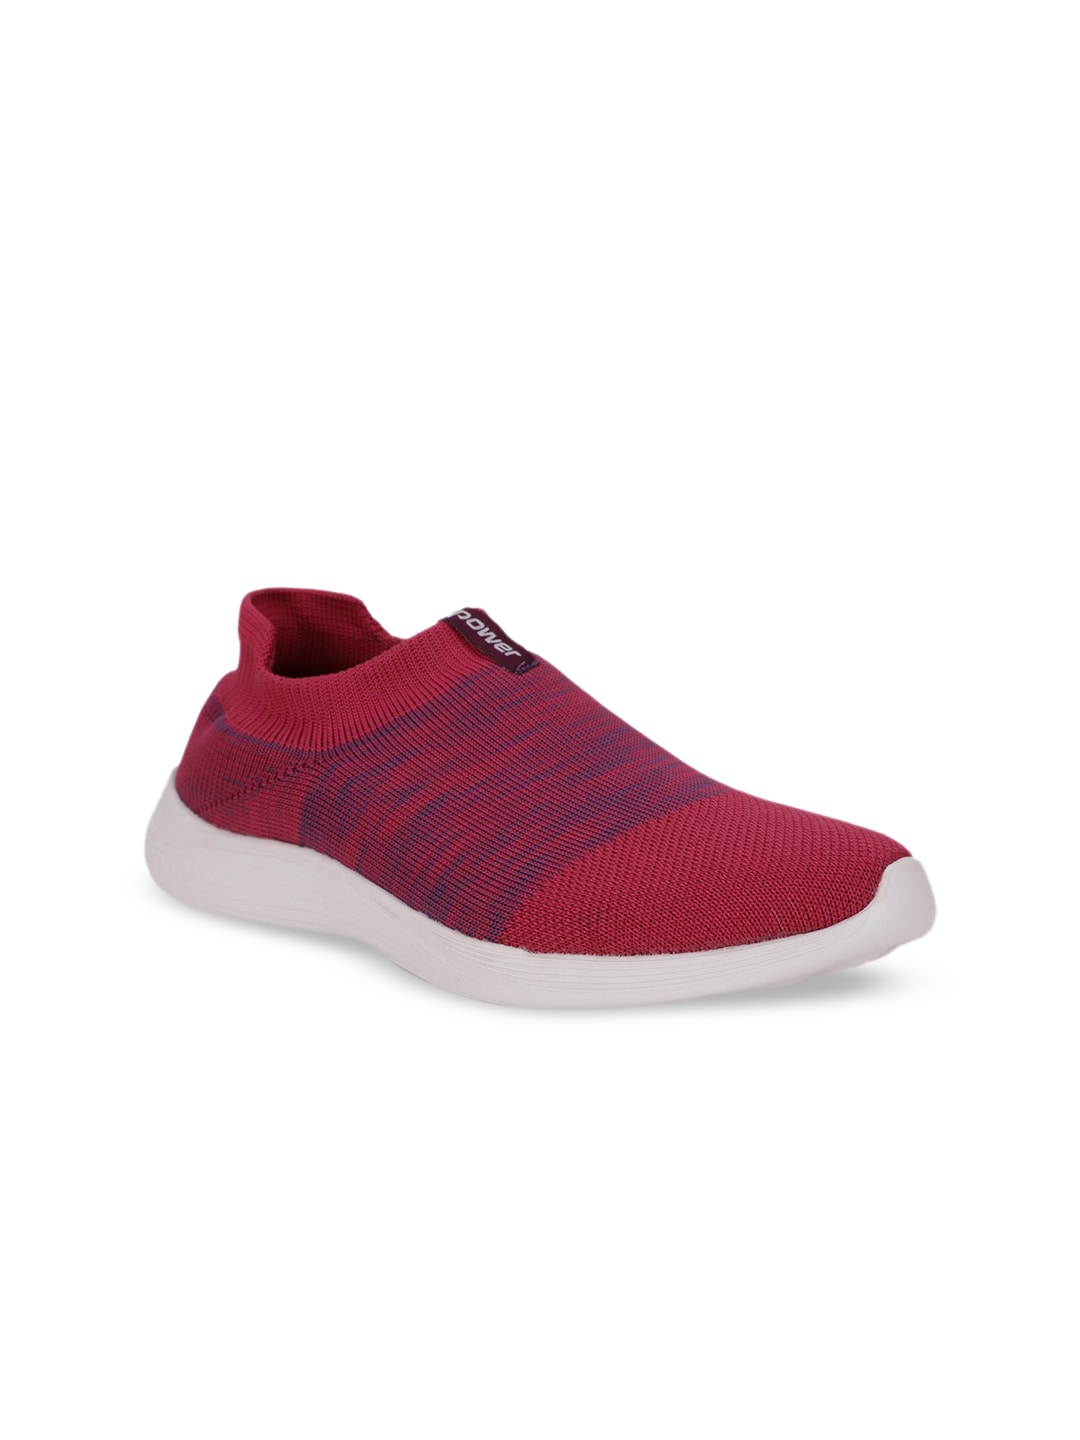 Power Women Pink Woven Design Slip-On Sneakers Price in India